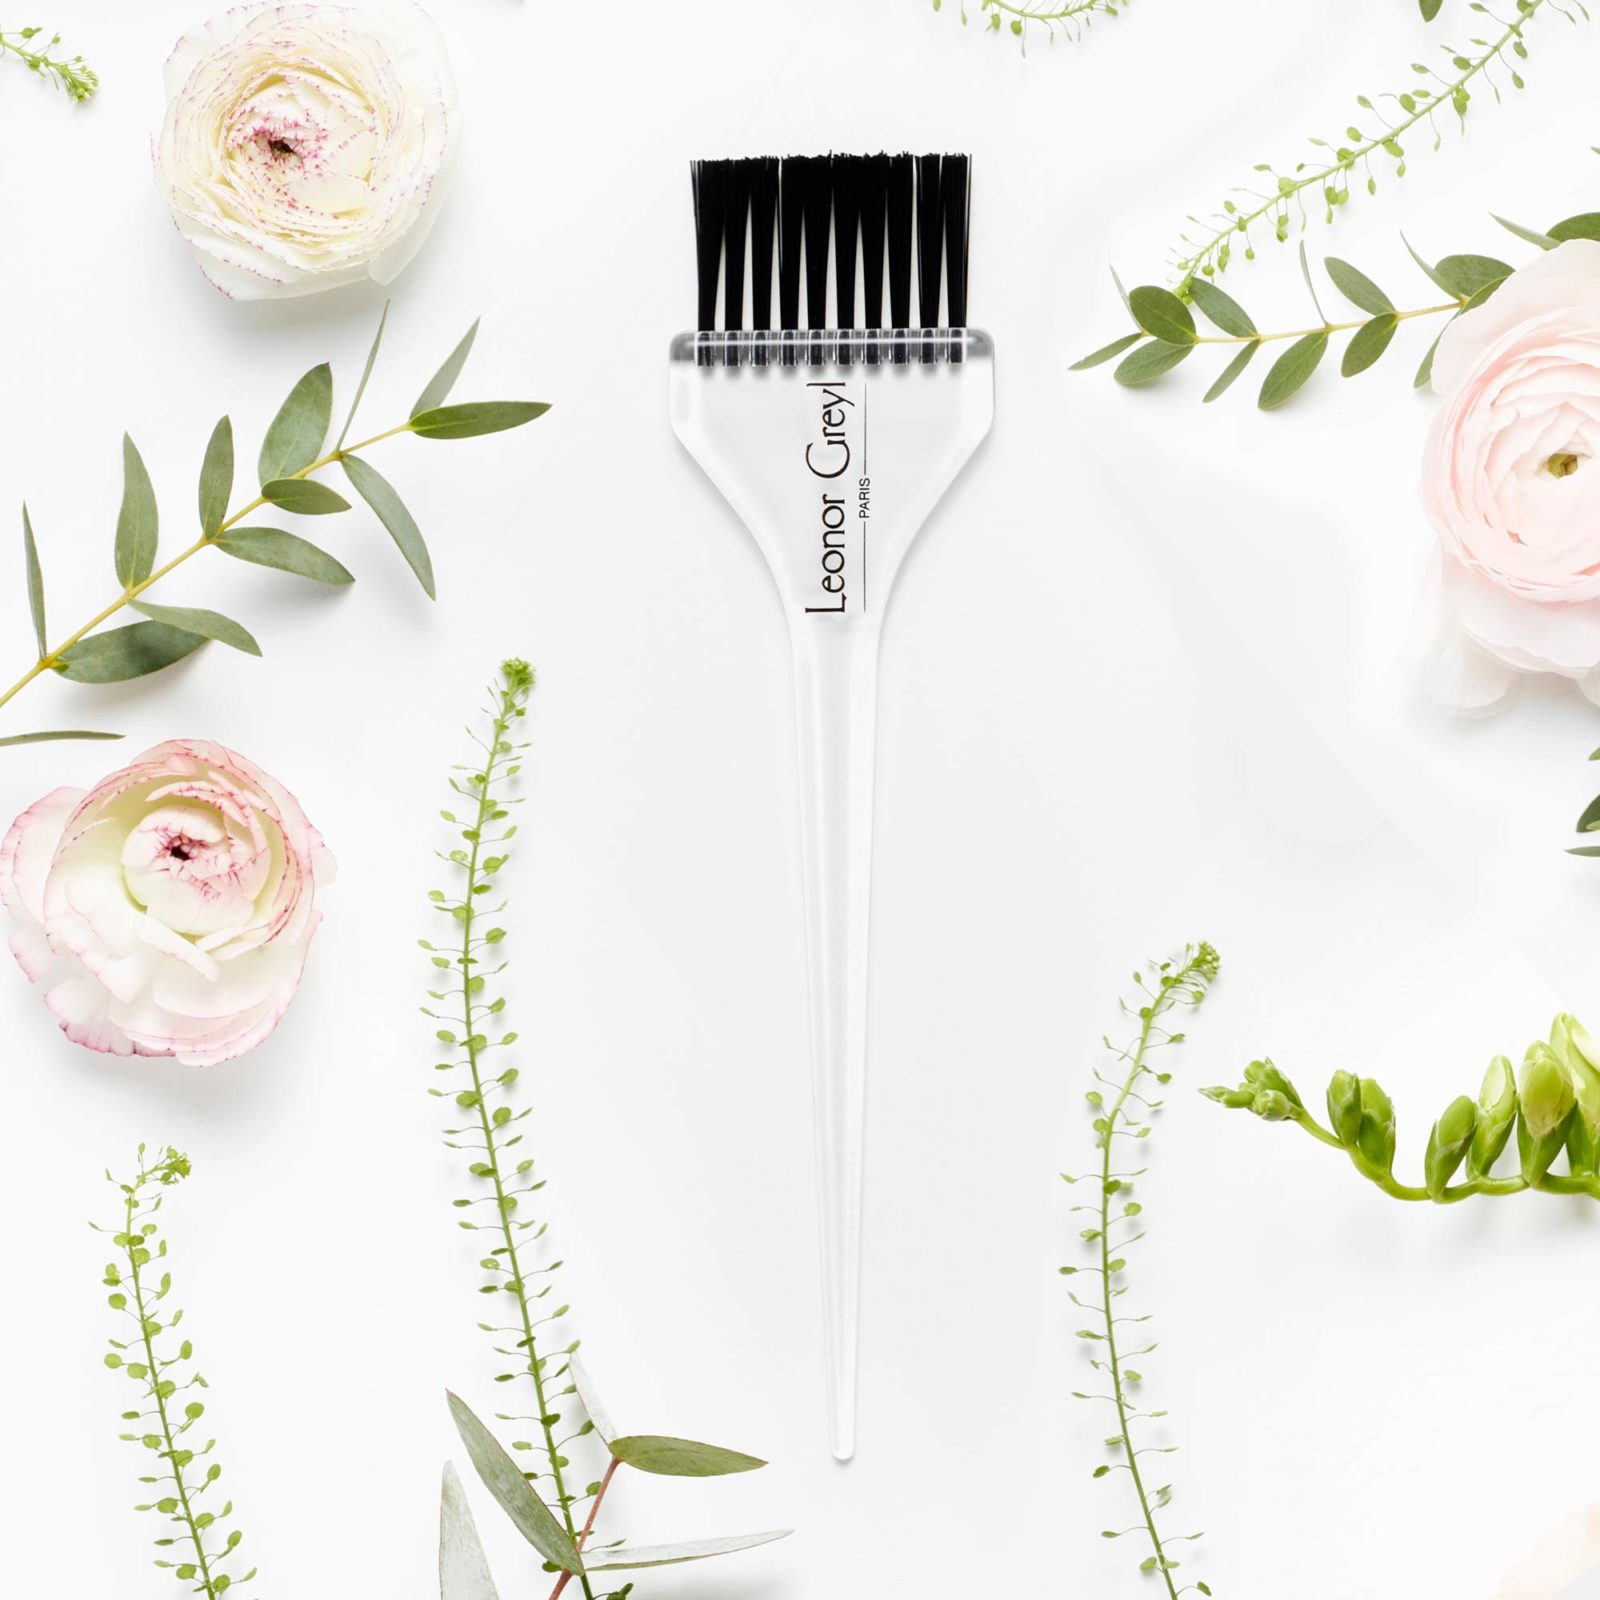 leonor greyl at home treatment brush amongst pink flowers and greenery